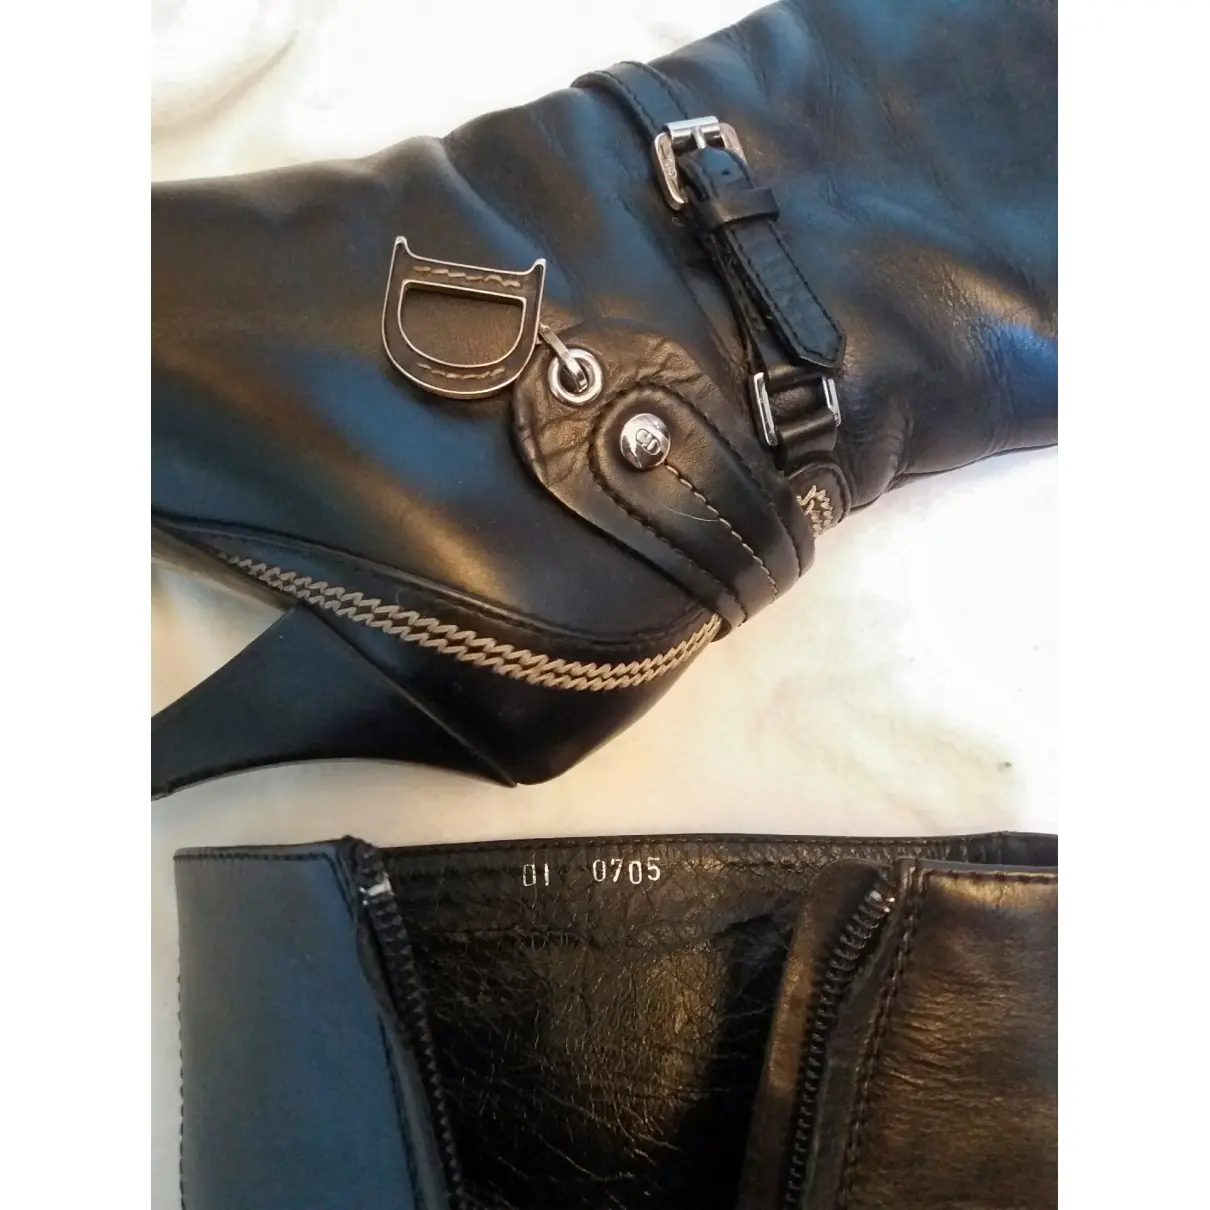 Dior Leather boots for sale - Vintage